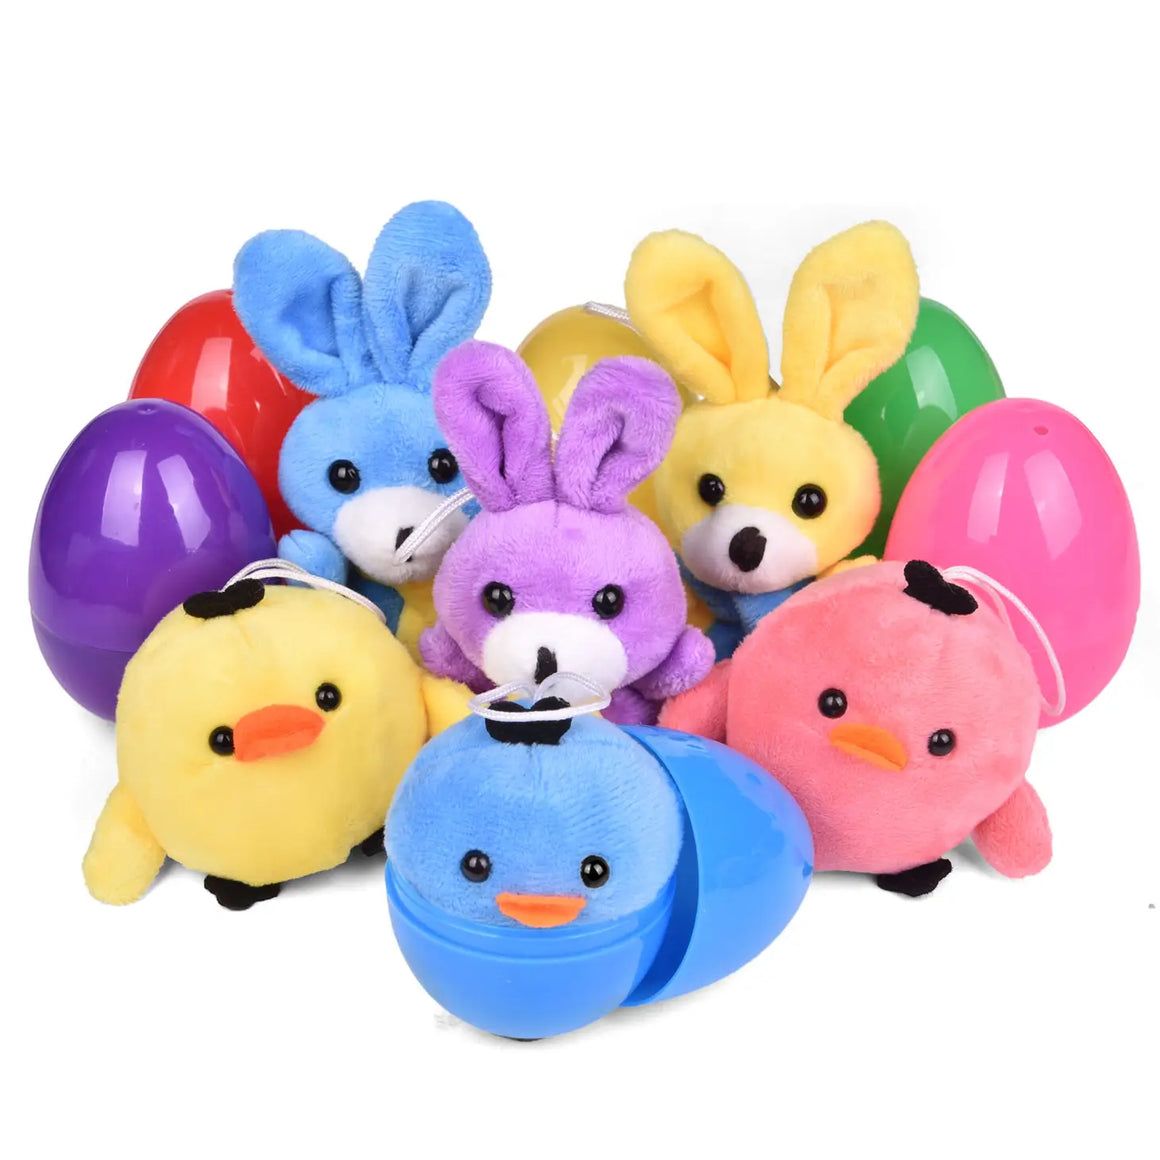 PRE-FILLED SURPRISE EGGS - PLUSH BUNNIES AND CHICKS